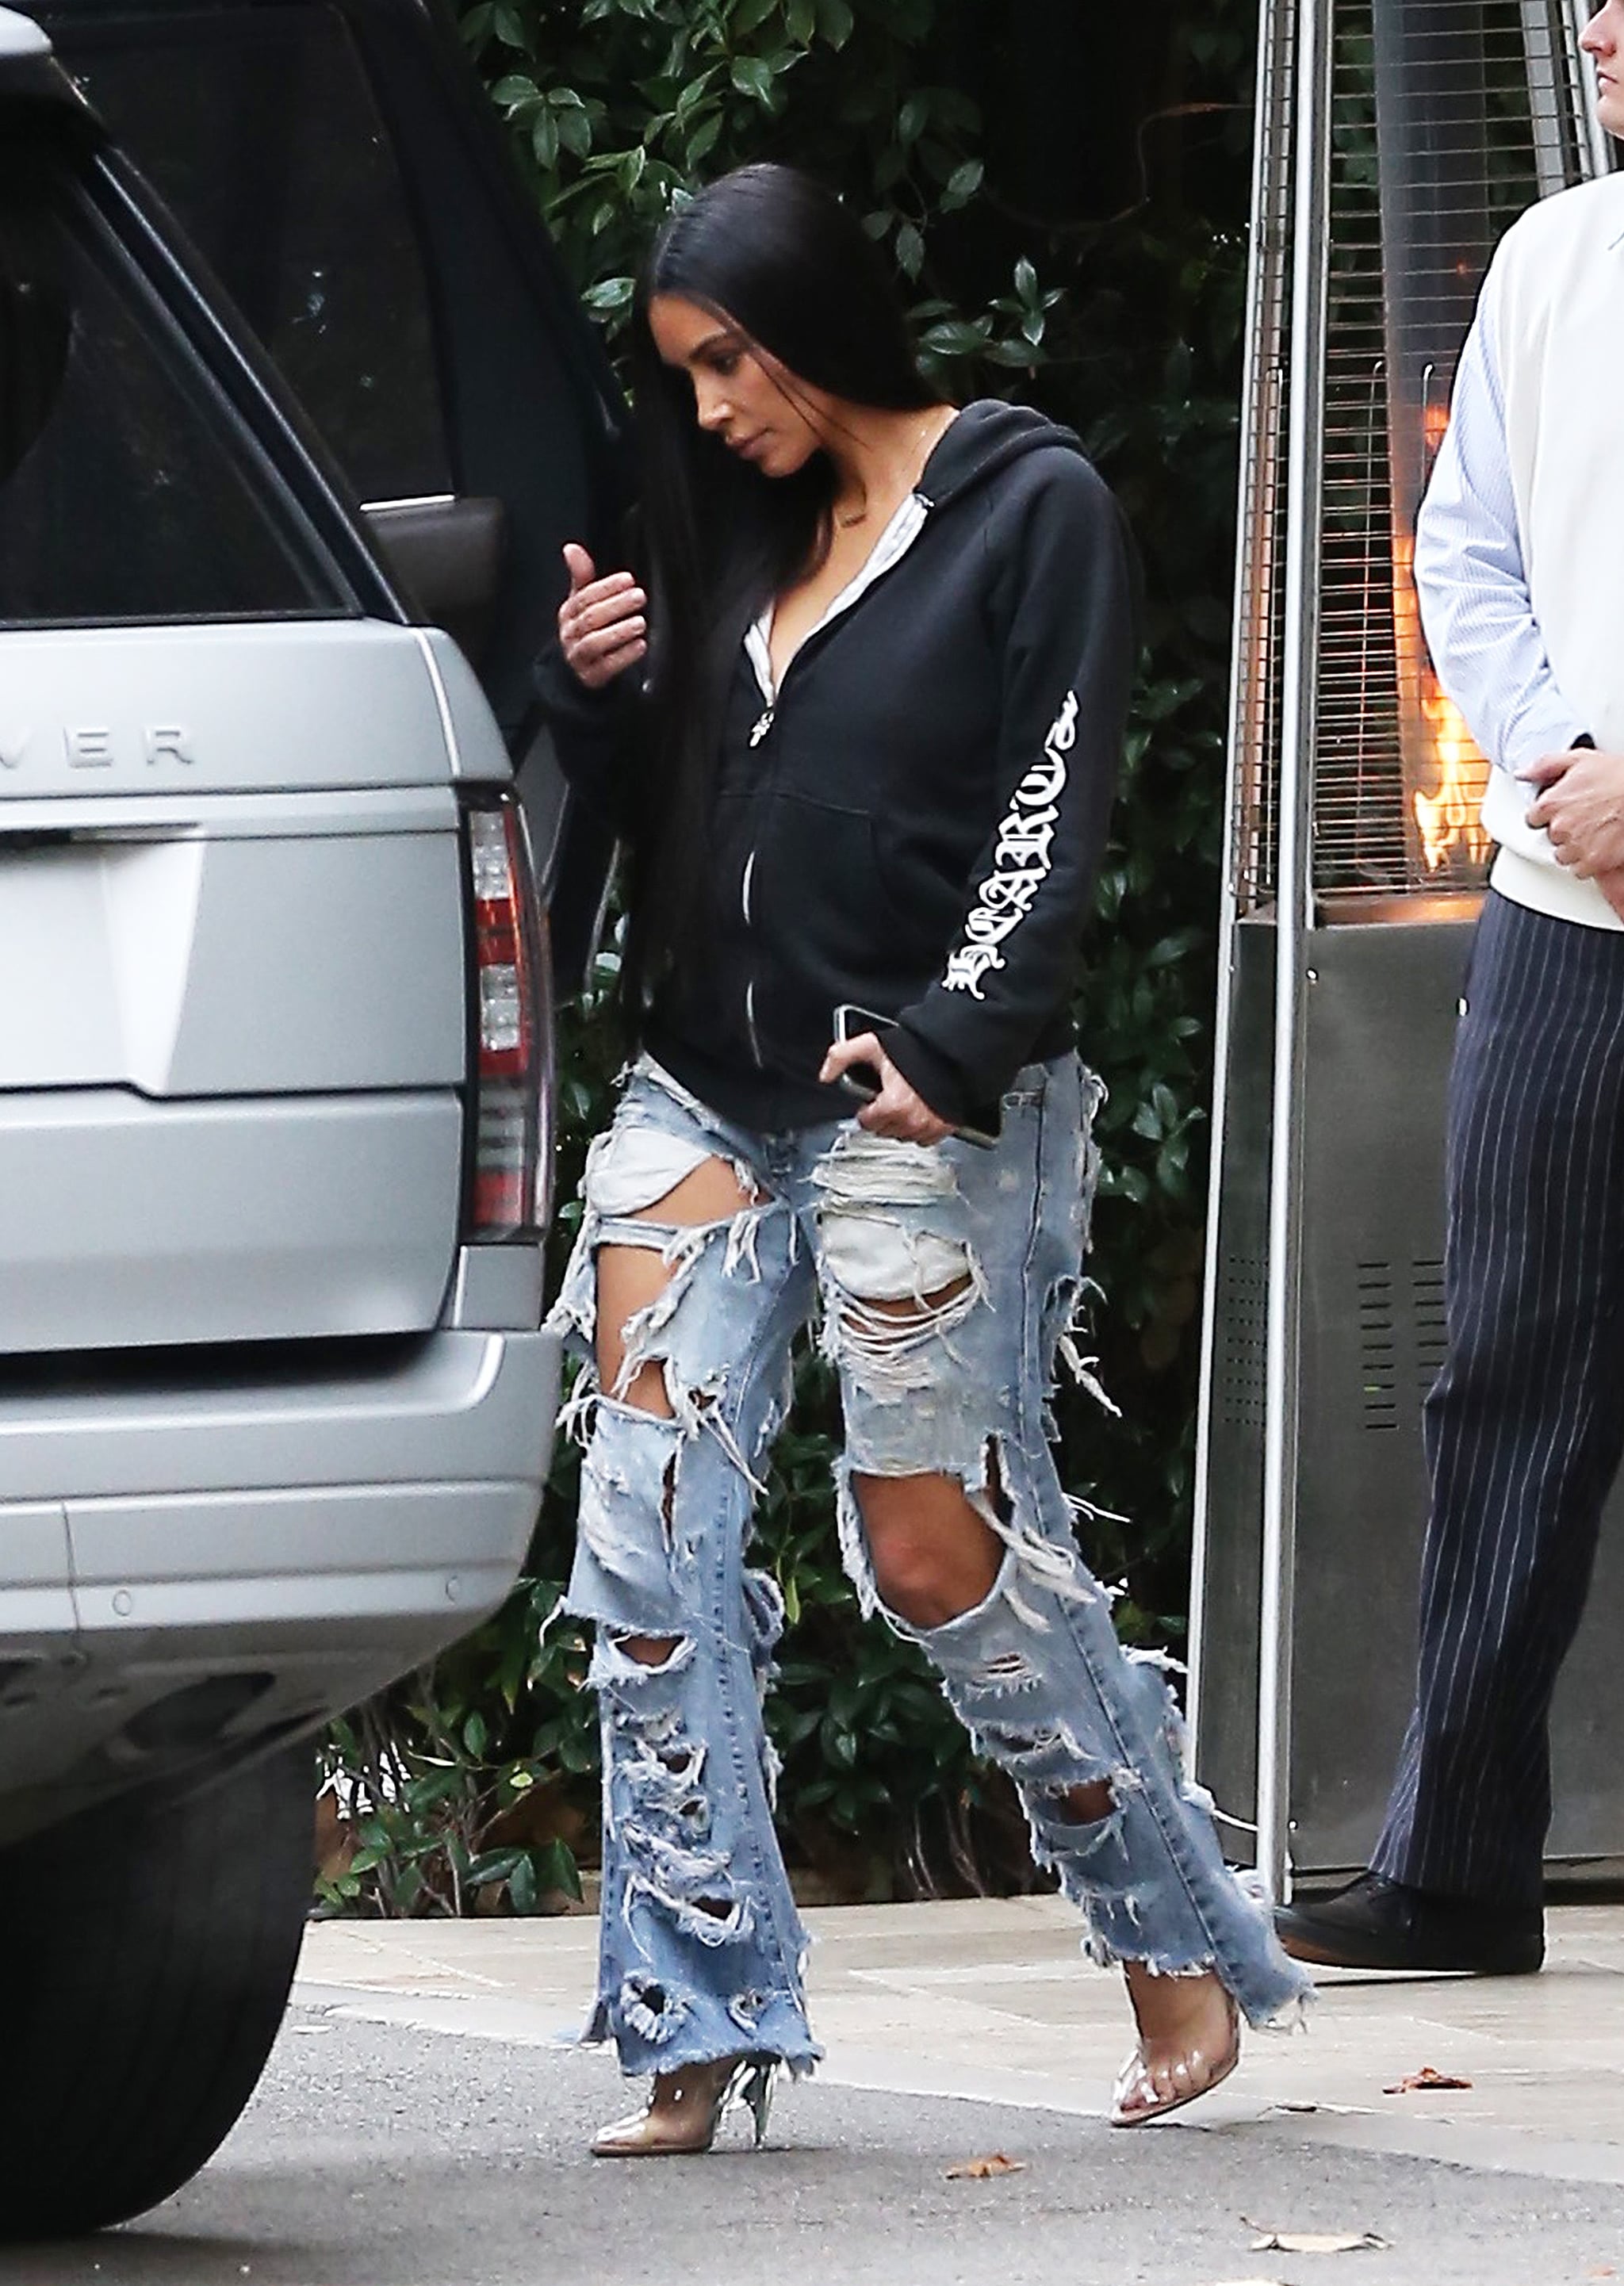 moe T Met name Fashion, Shopping & Style | Once You See Kim Kardashian's Jeans, No Denim  Will Ever Compare | POPSUGAR Fashion Photo 8